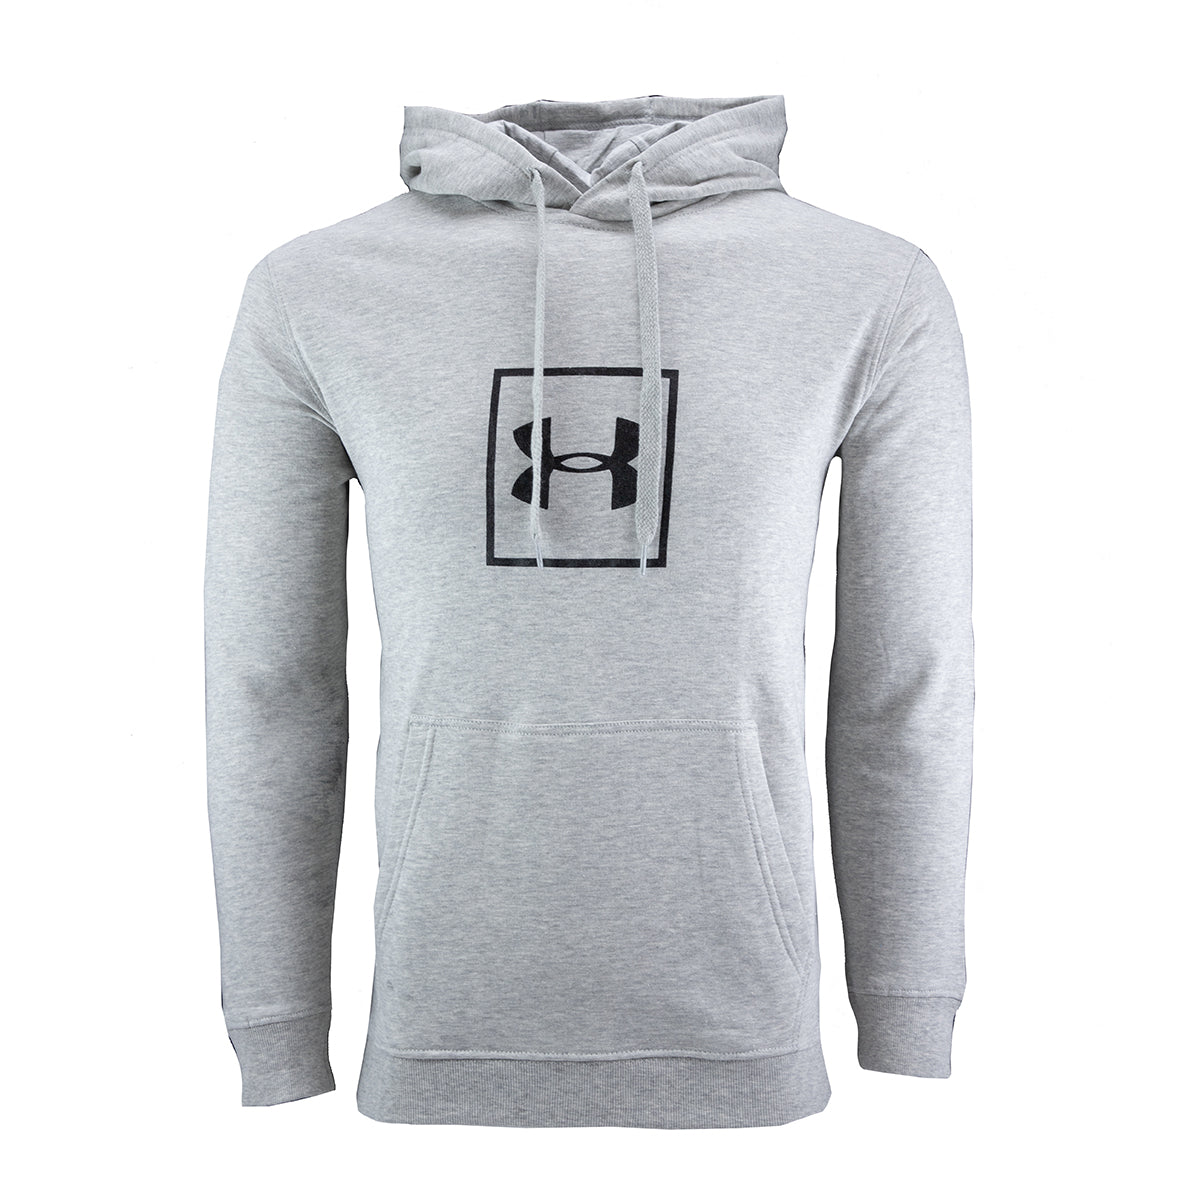 Under Armour Men’s Rival Super Soft Logo Hoodies for $16.99